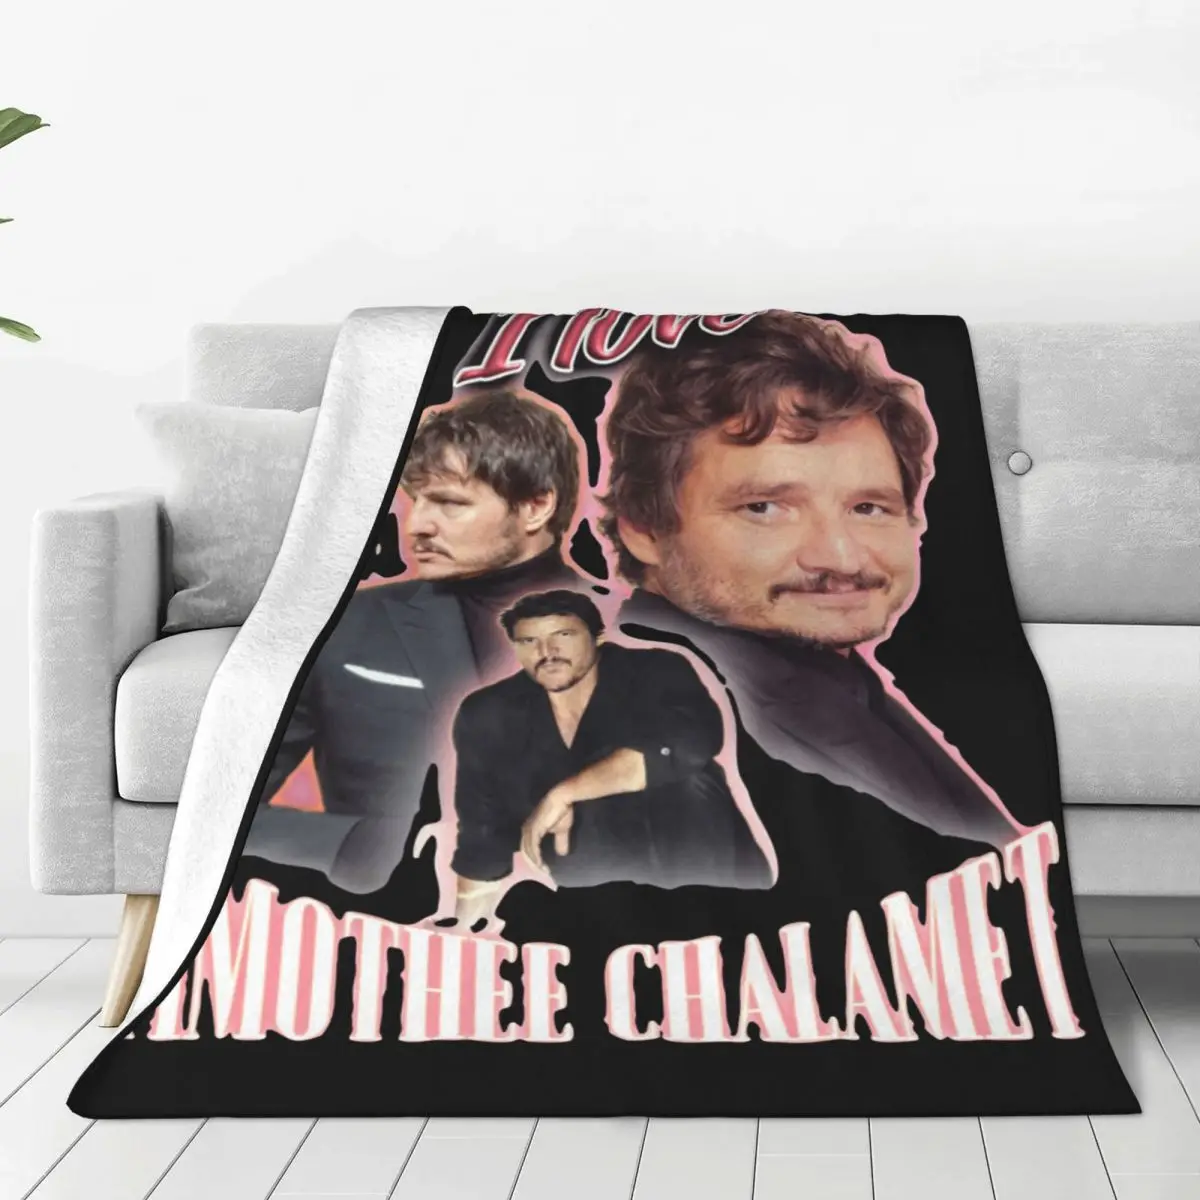 

I Love Timothee Chalamet Pedro Pascal Cursed Fan Collage Flannel Throw Blanket Blanket for Bedding Couch Plush Thin Quilt